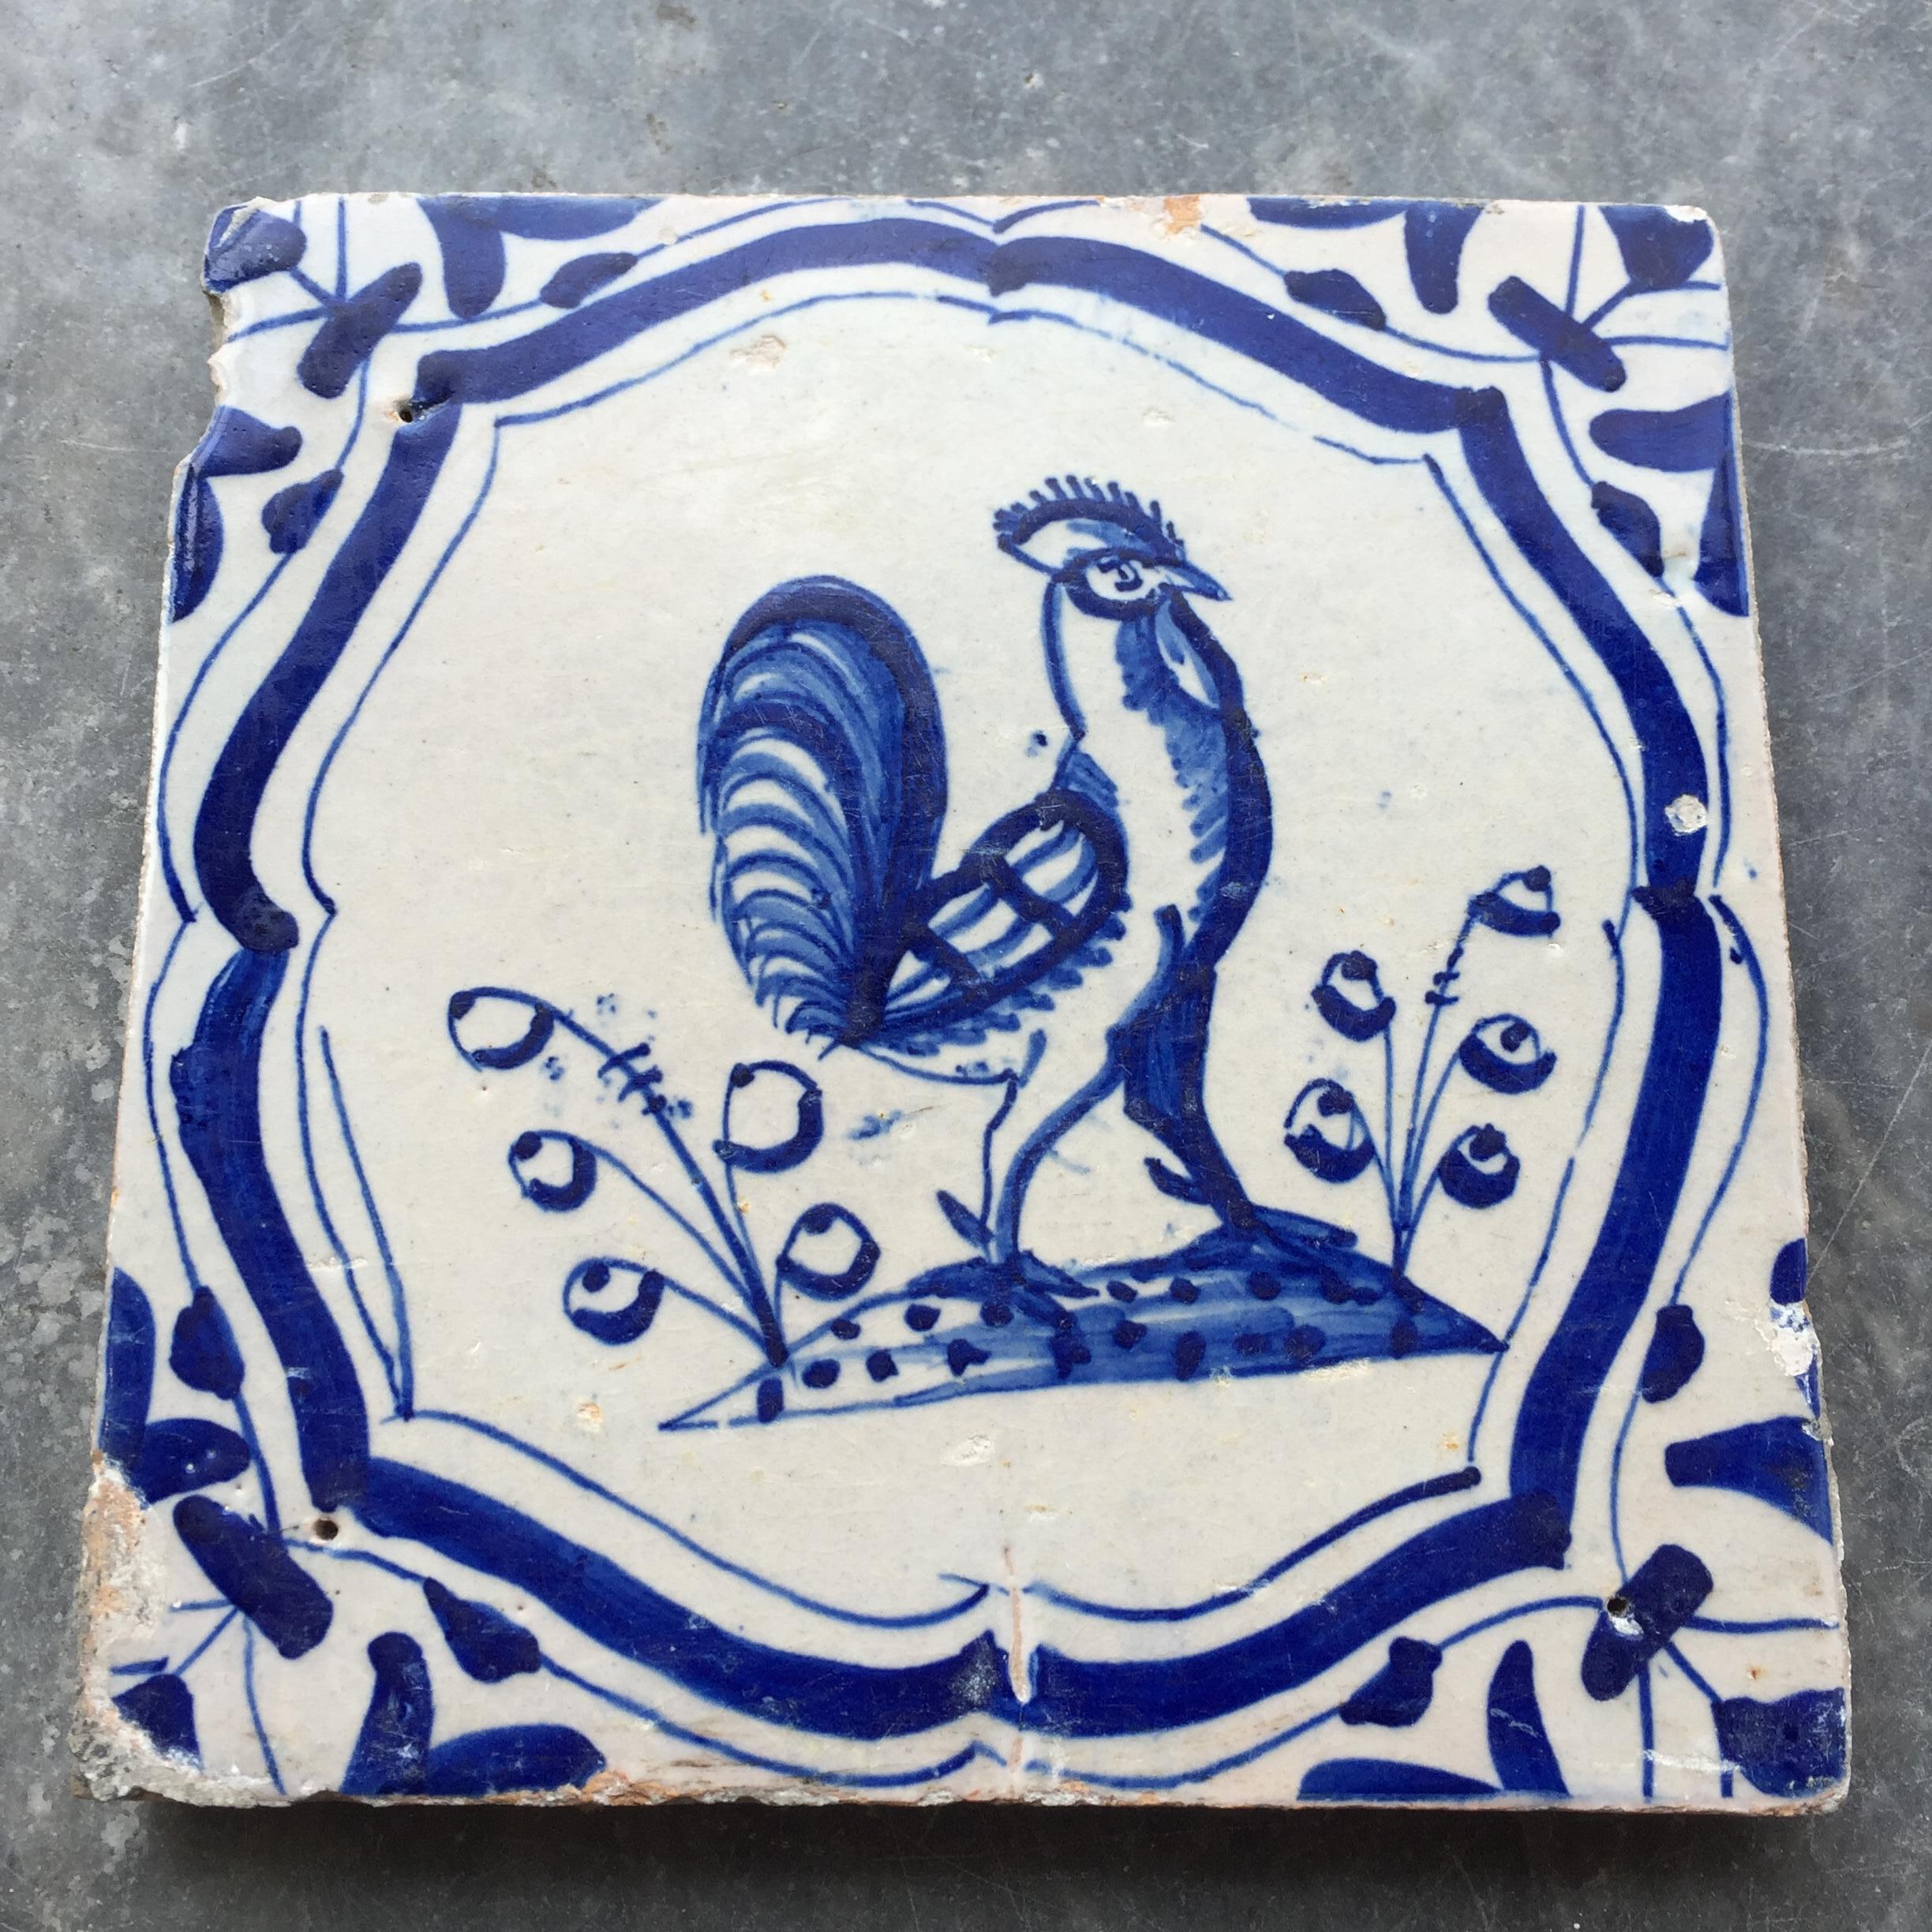 Fired Two Rare Dutch Delft Tile with Rooster and Chicken, 17th Century